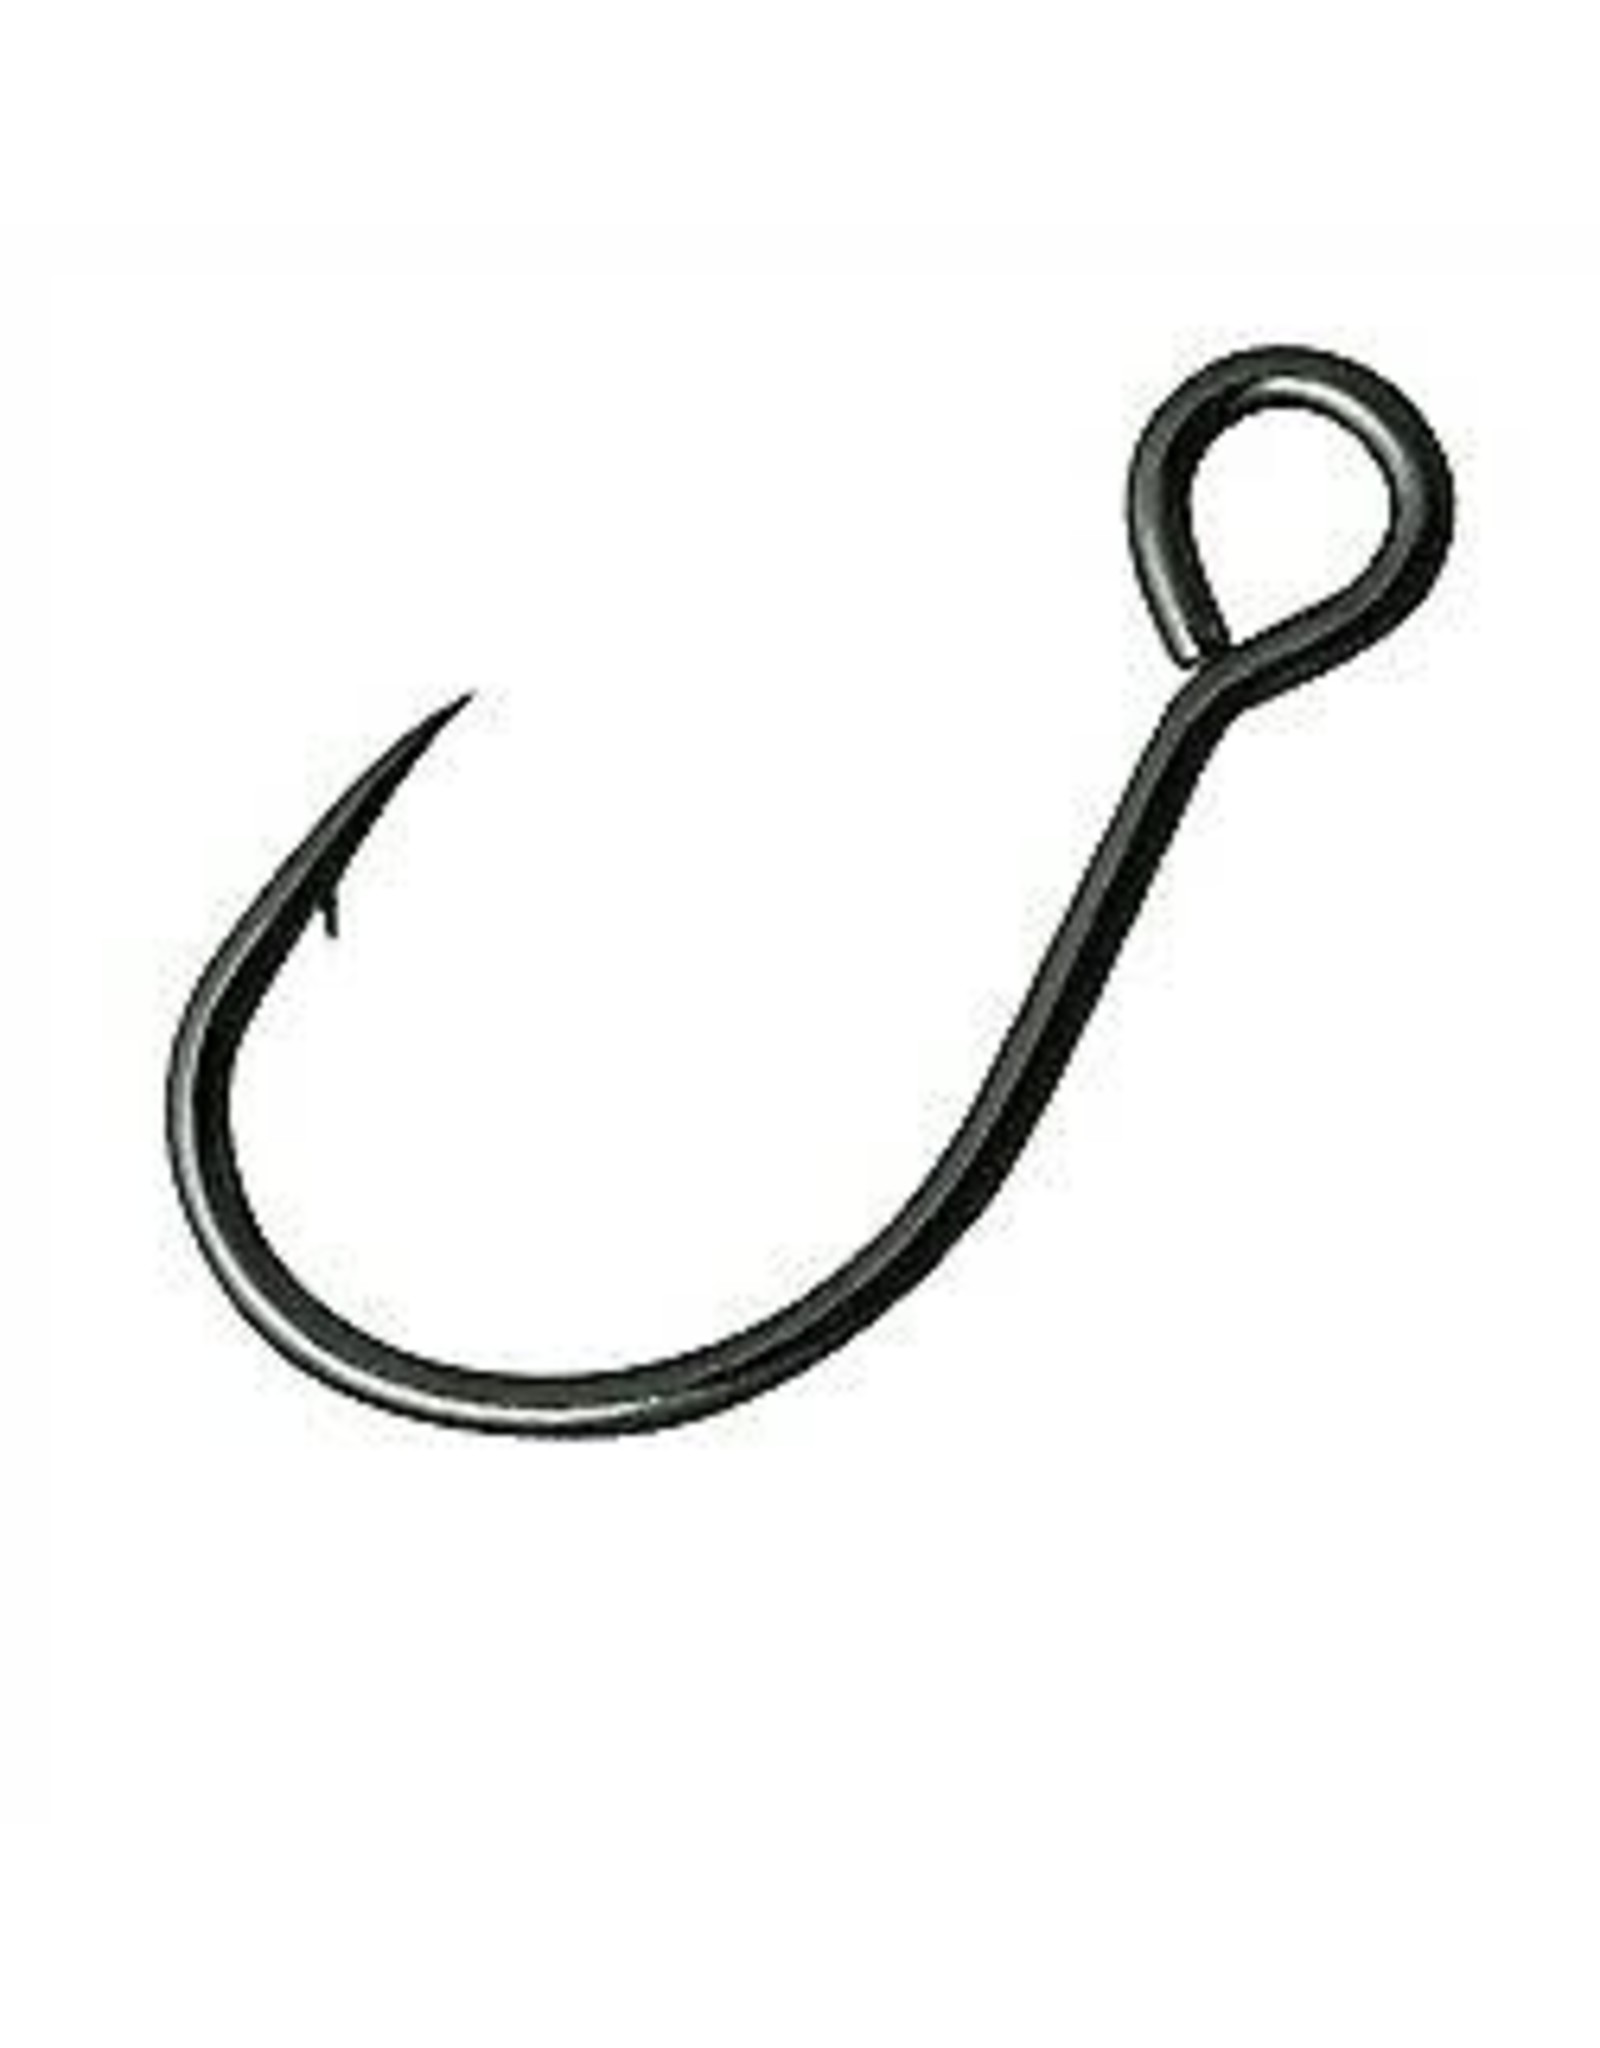 Owner Owner Single Replacement Hook #2